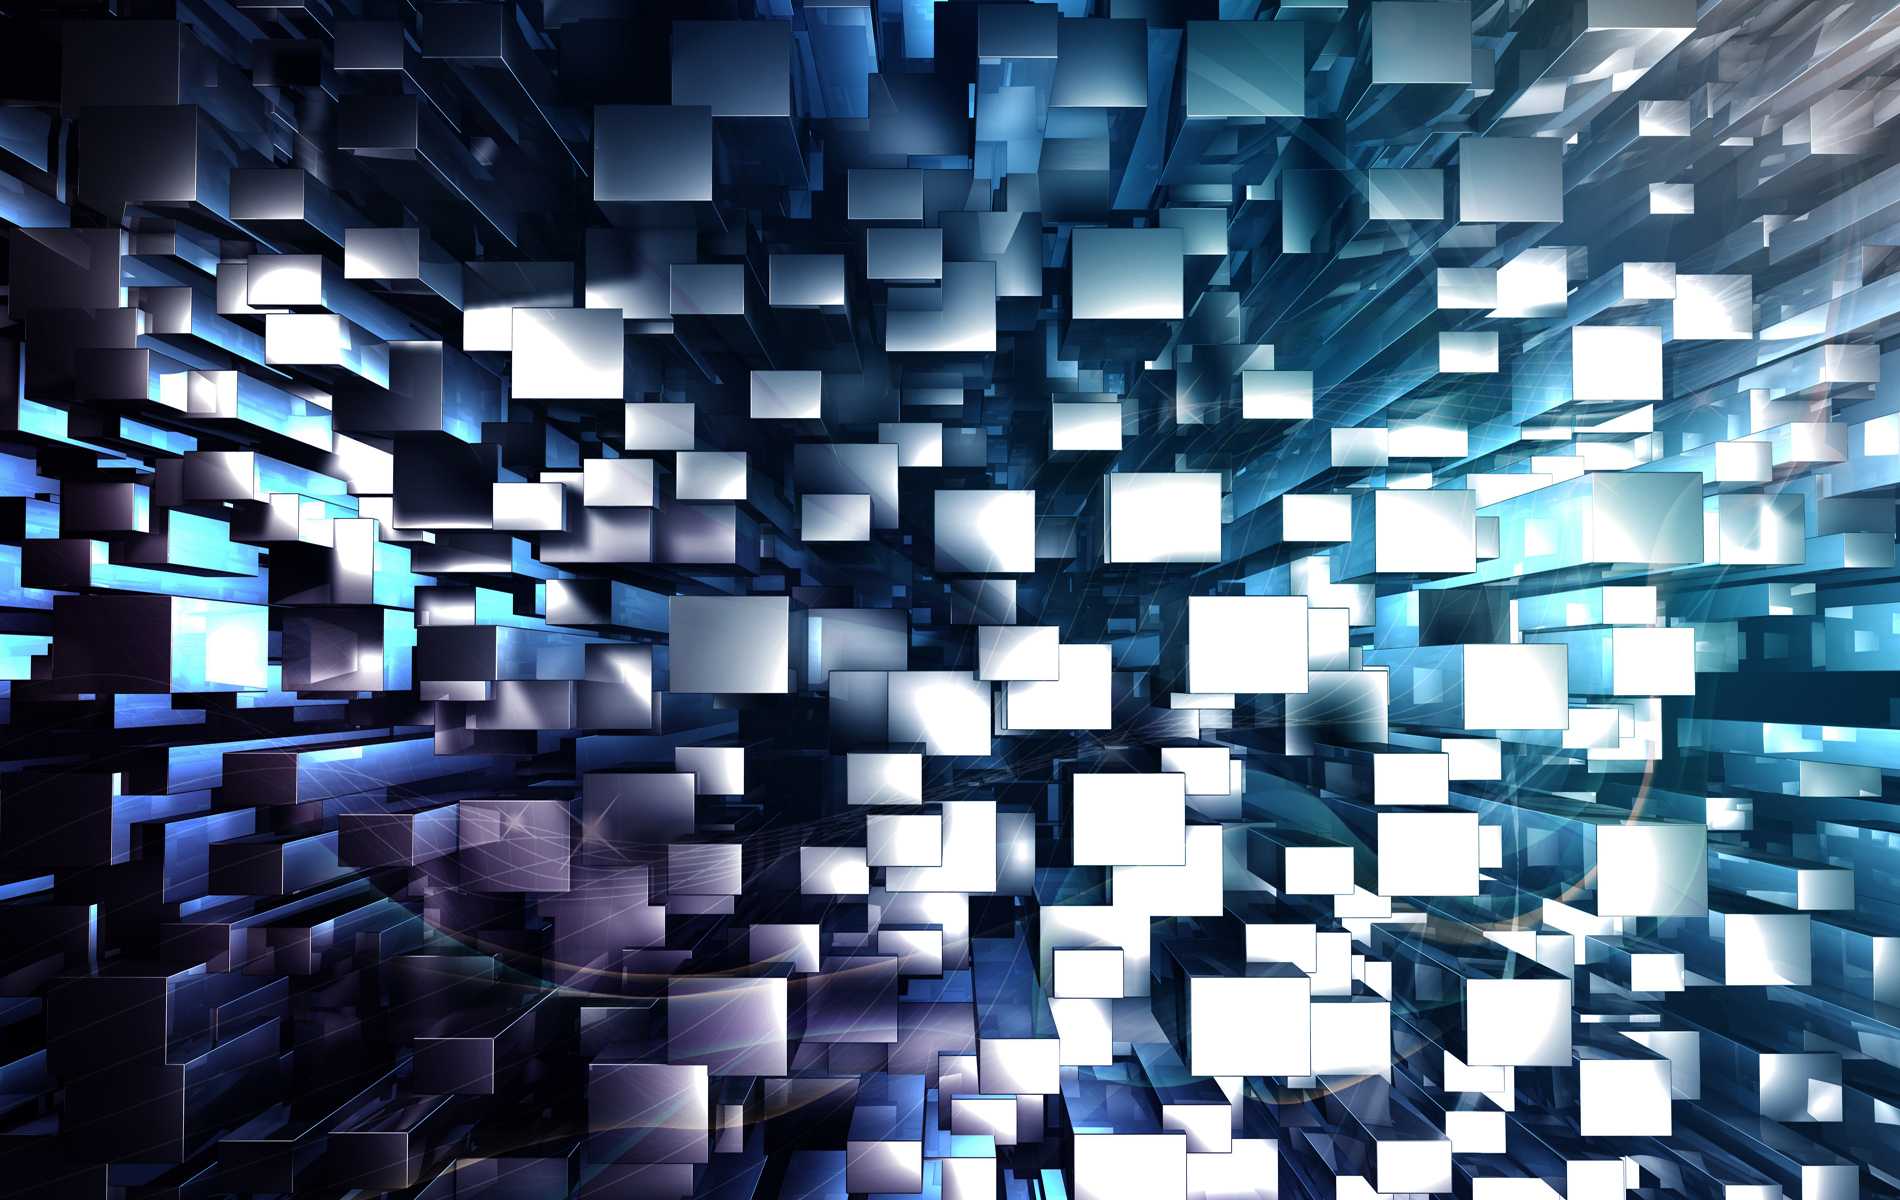  Windows 10 Desktop Background in 19201200 with abstract blue in 3D